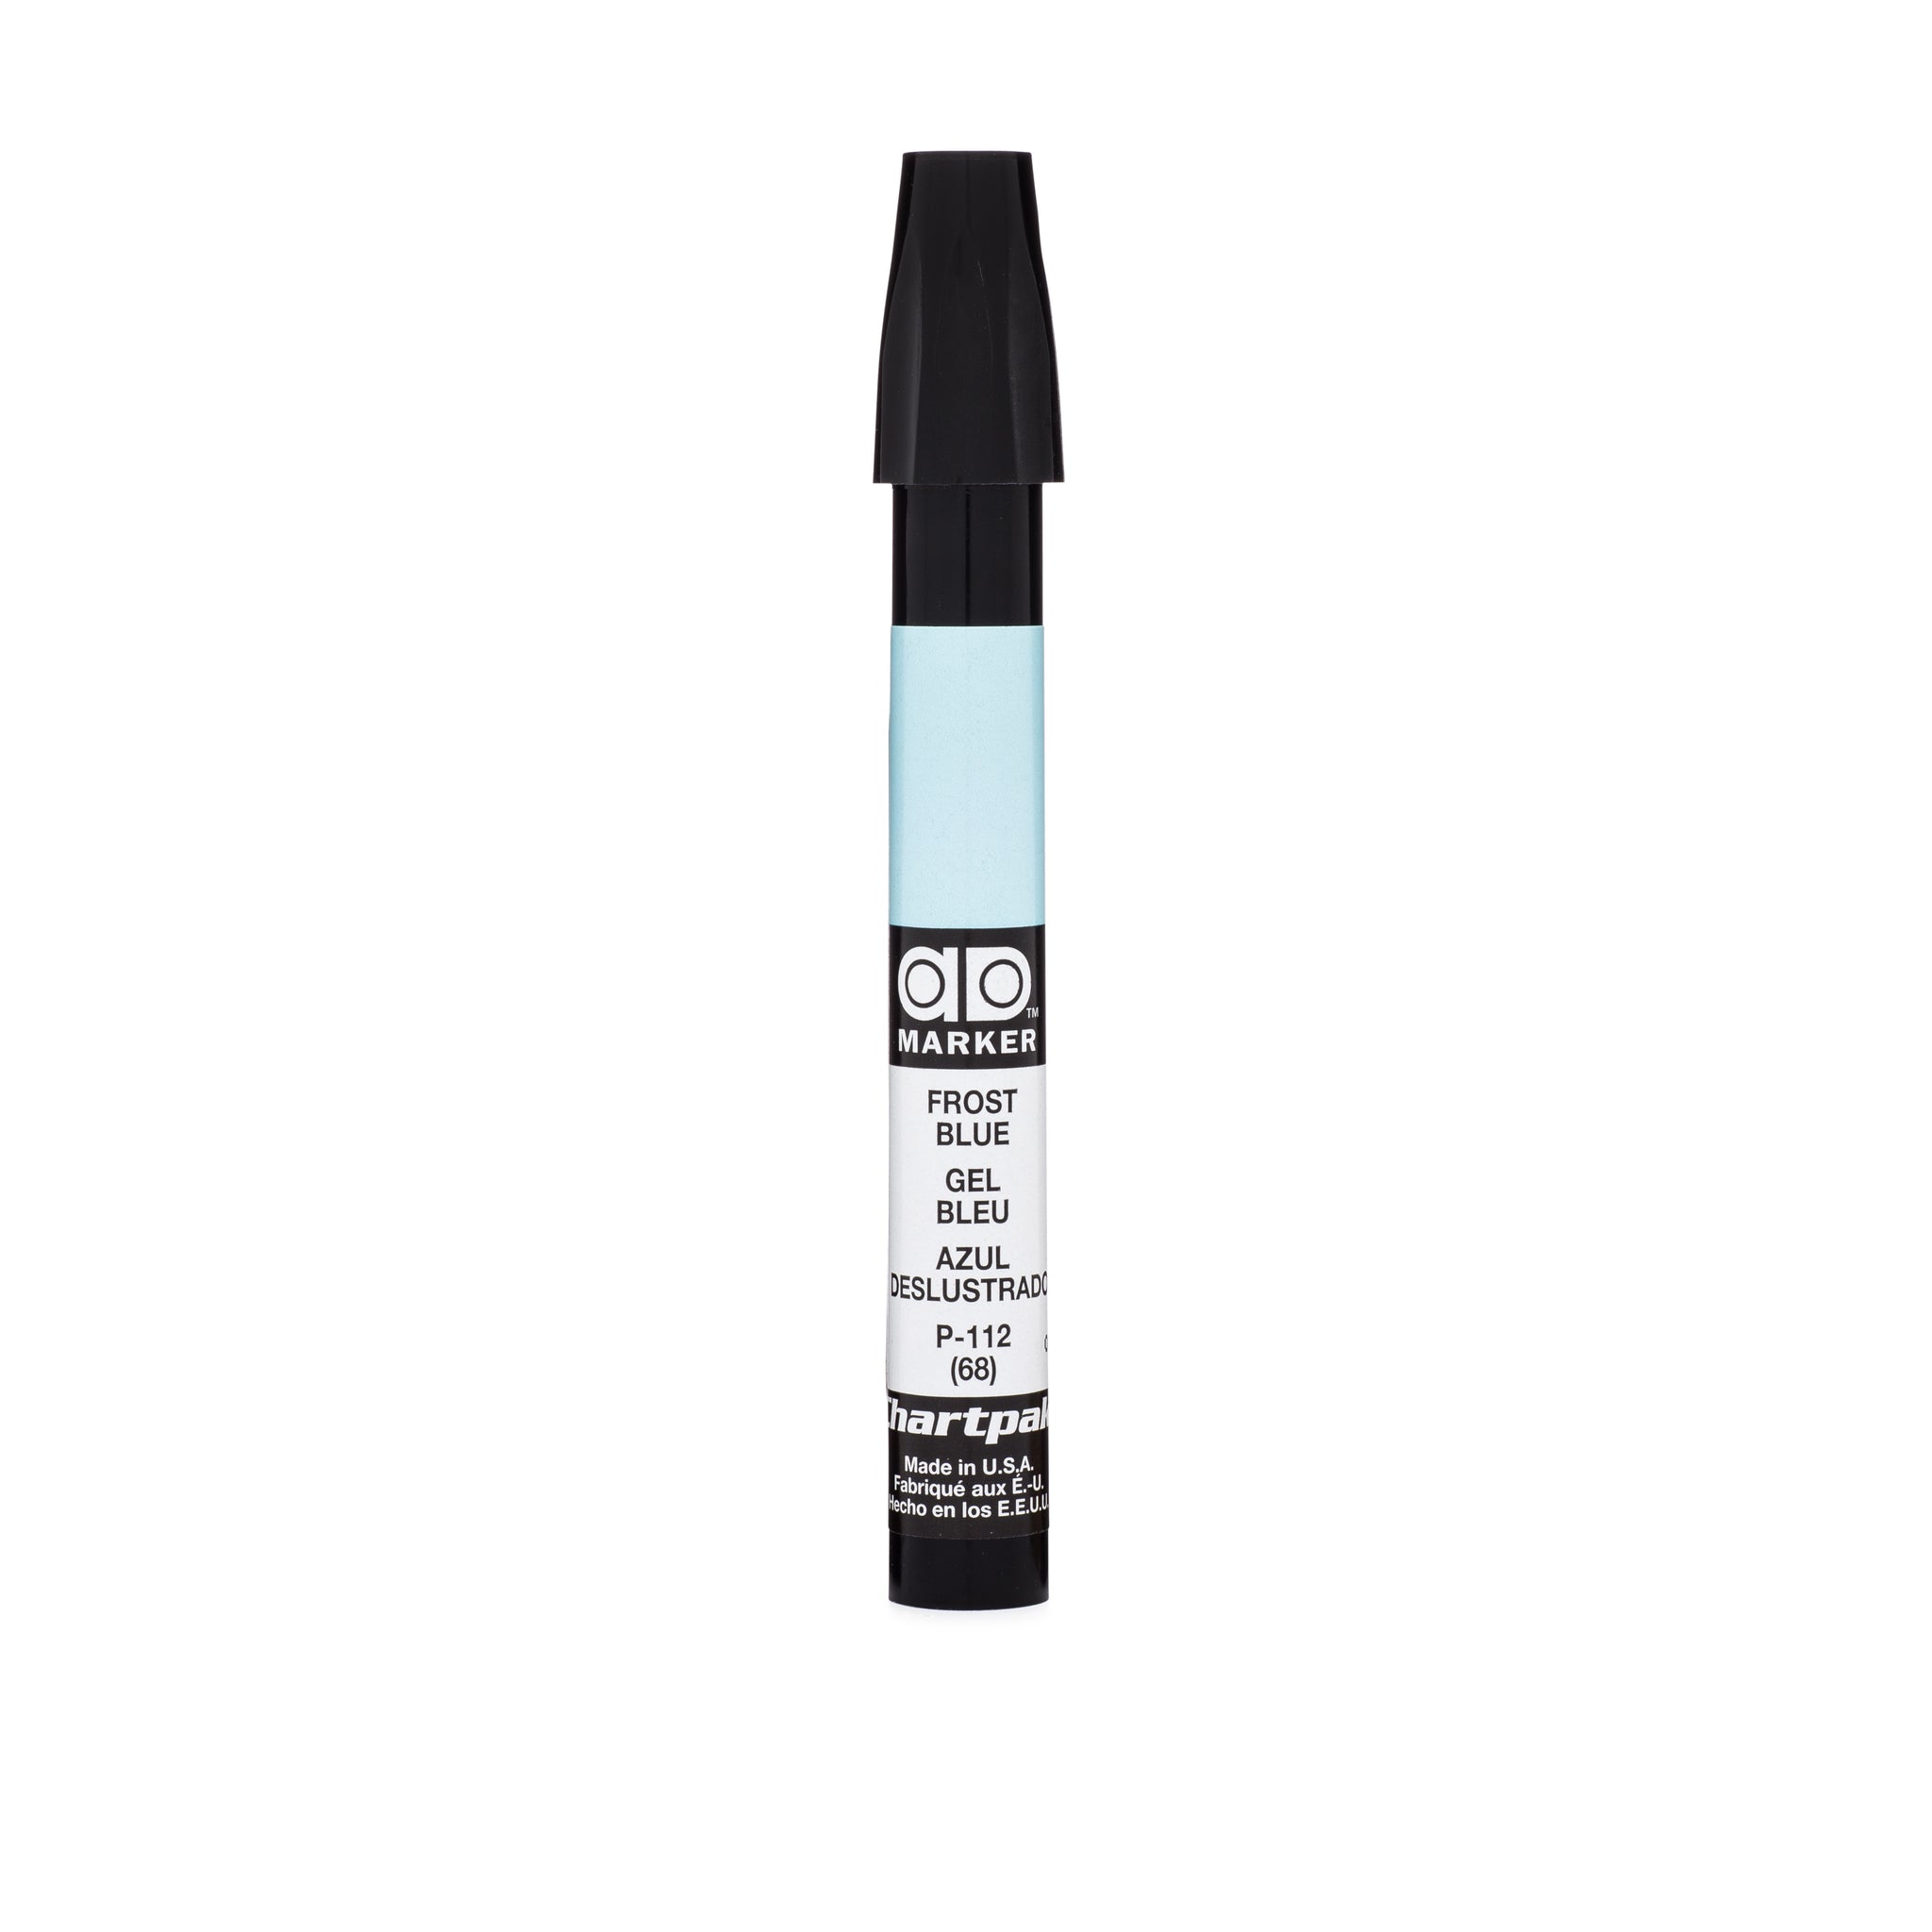 Ad Marker Frost Blue 112